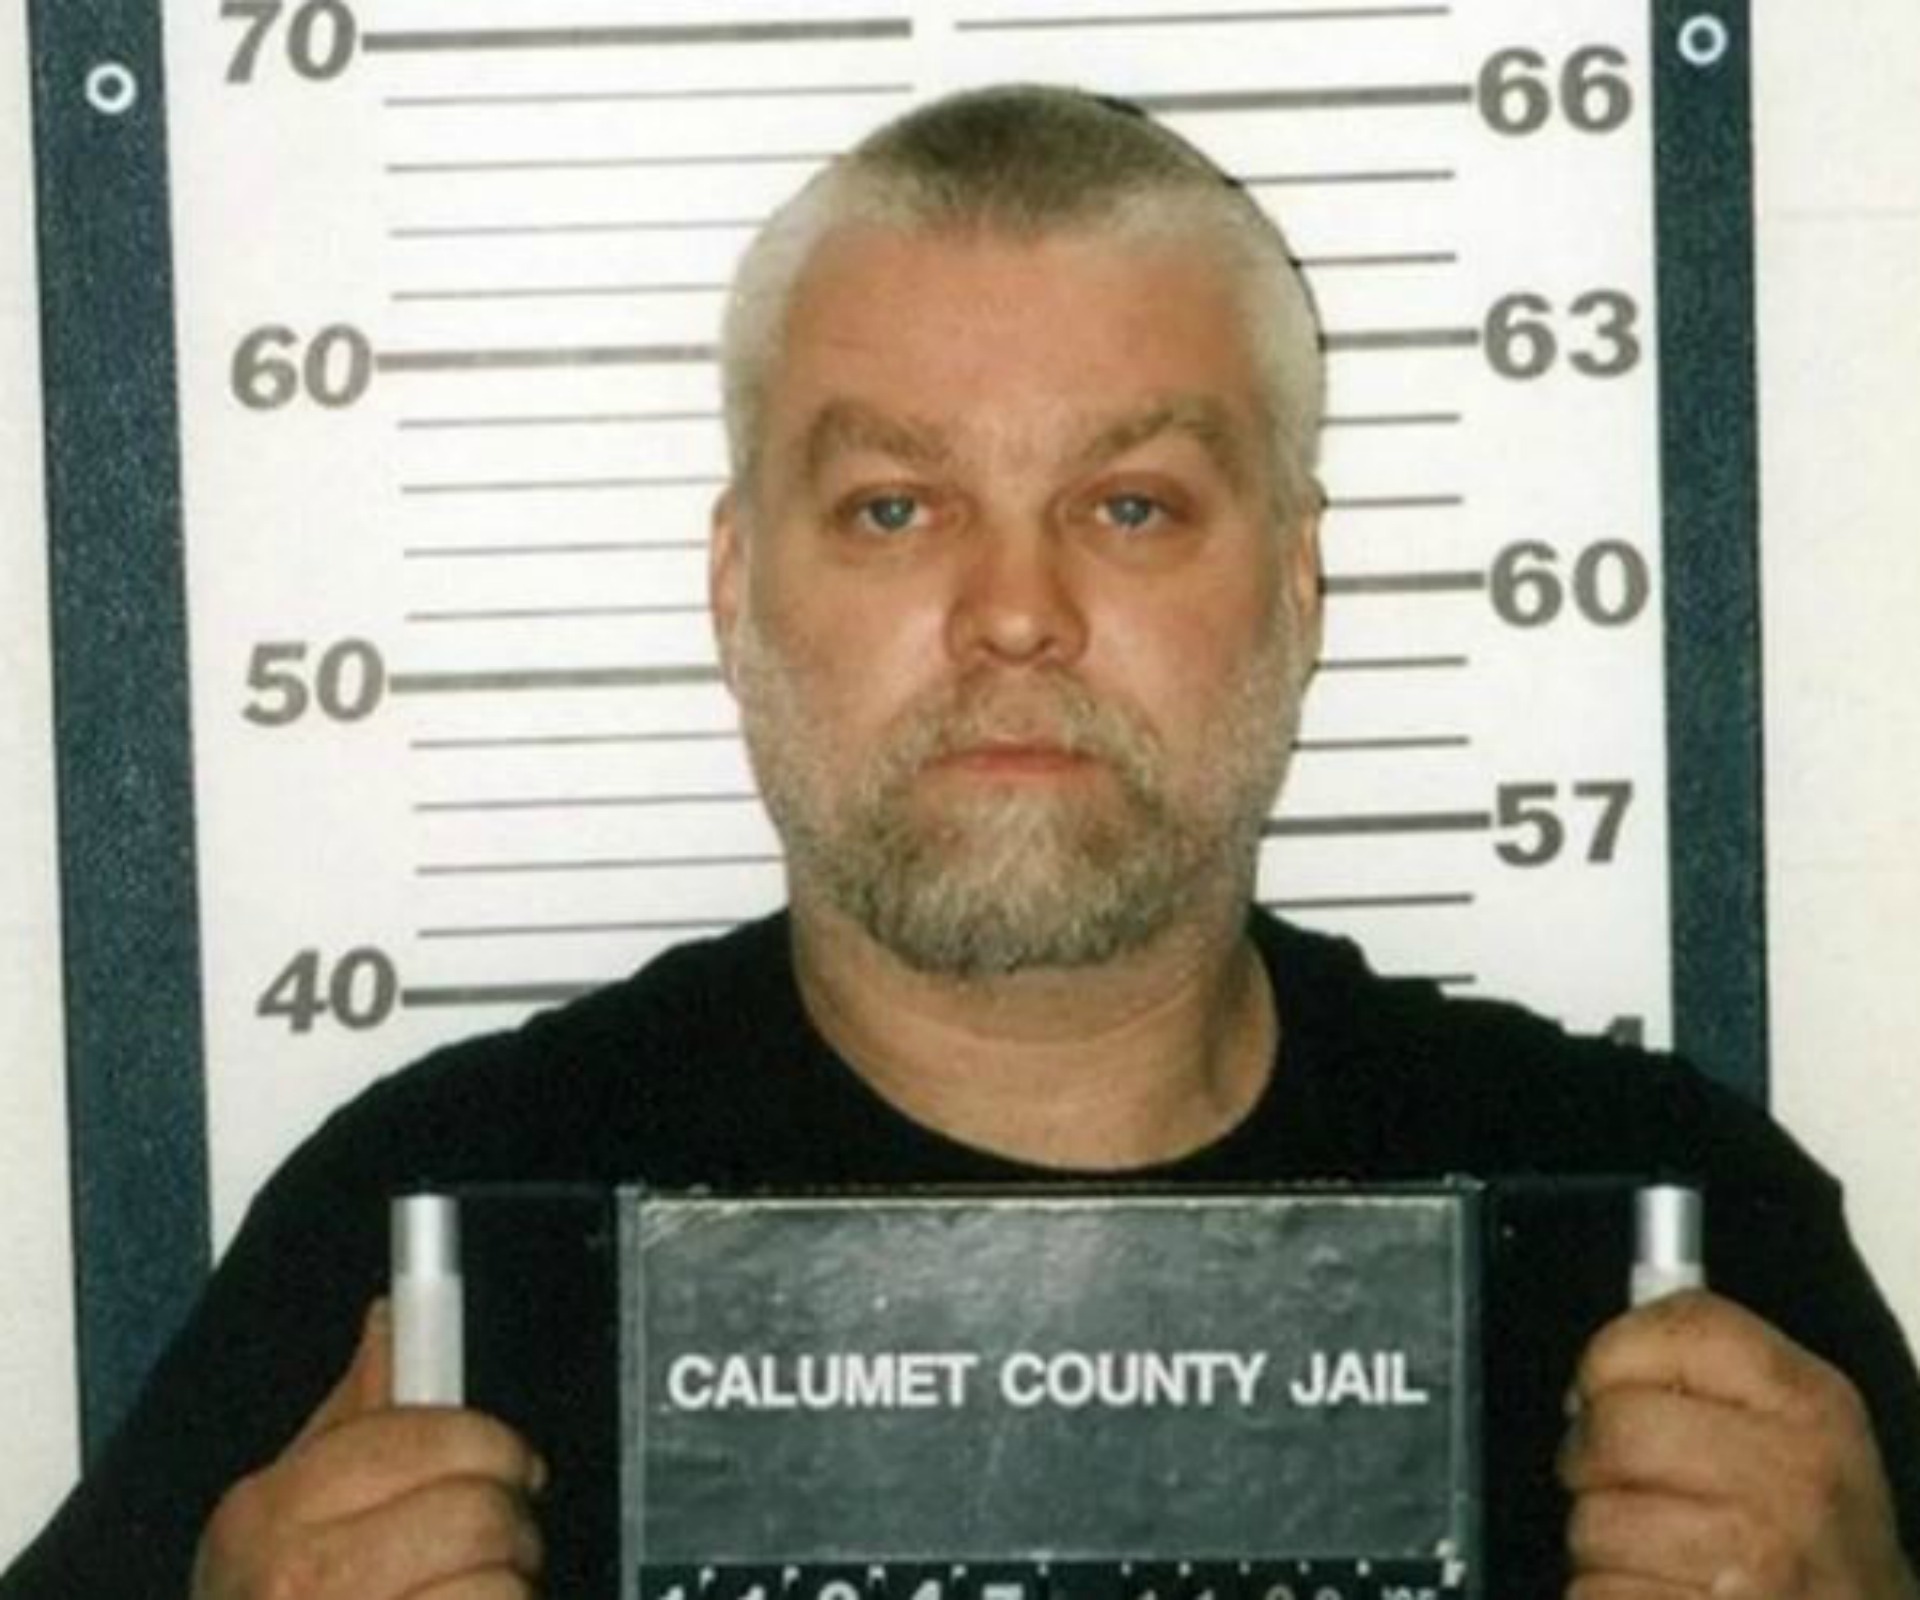 ‘He’s guilty’ – Steven Avery’s ex says he is capable of murder